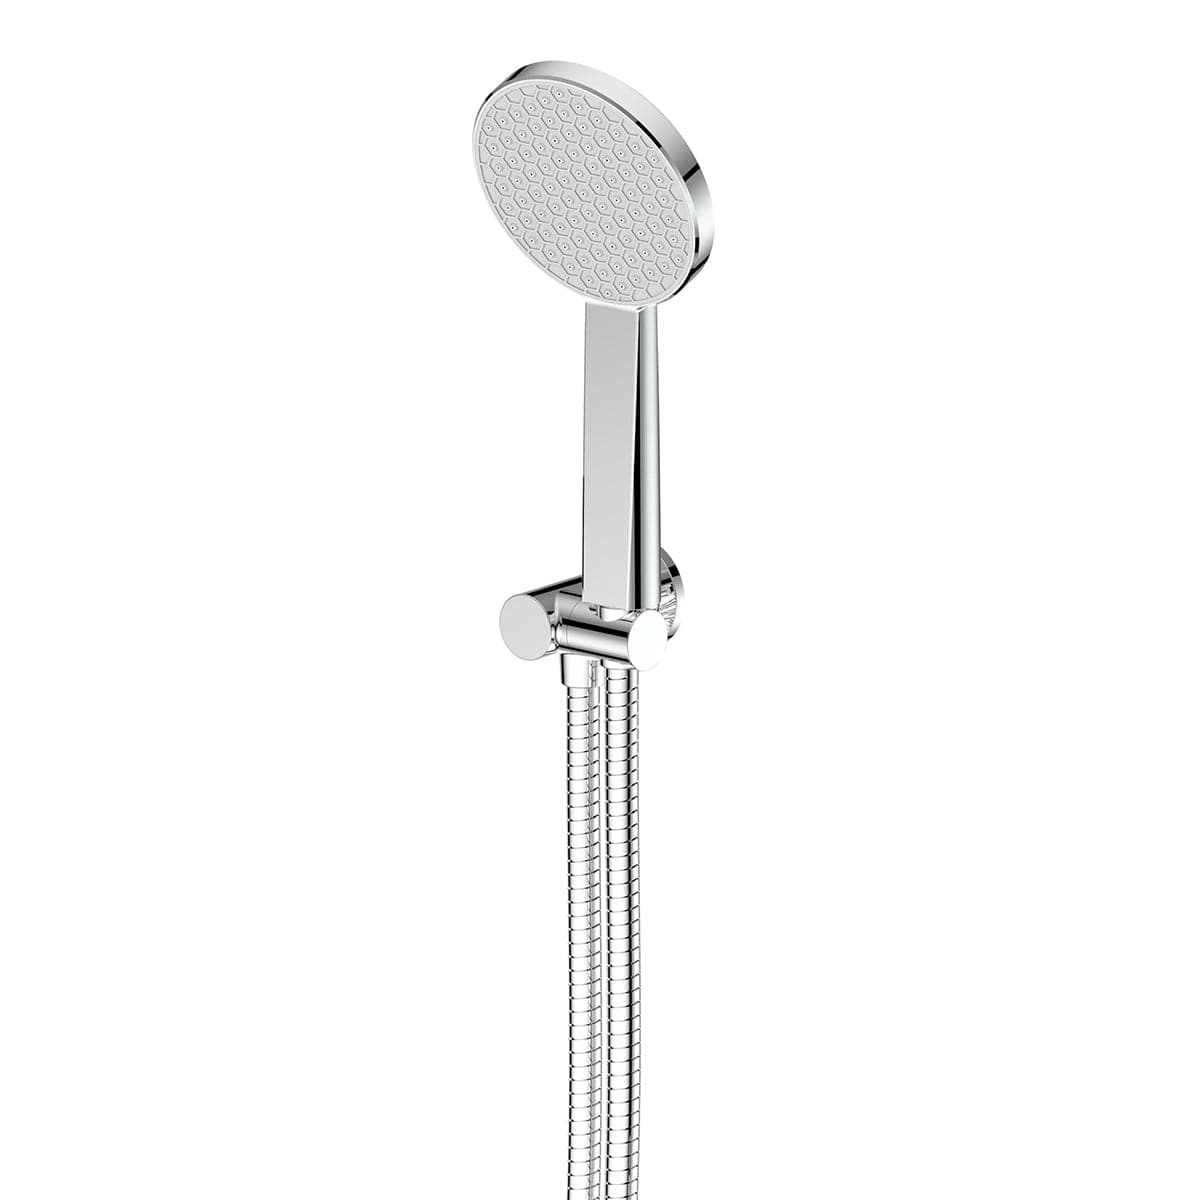 Greens shower Greens Glide RainBoost Hand Shower with Wall Outlet Bracket | Chrome